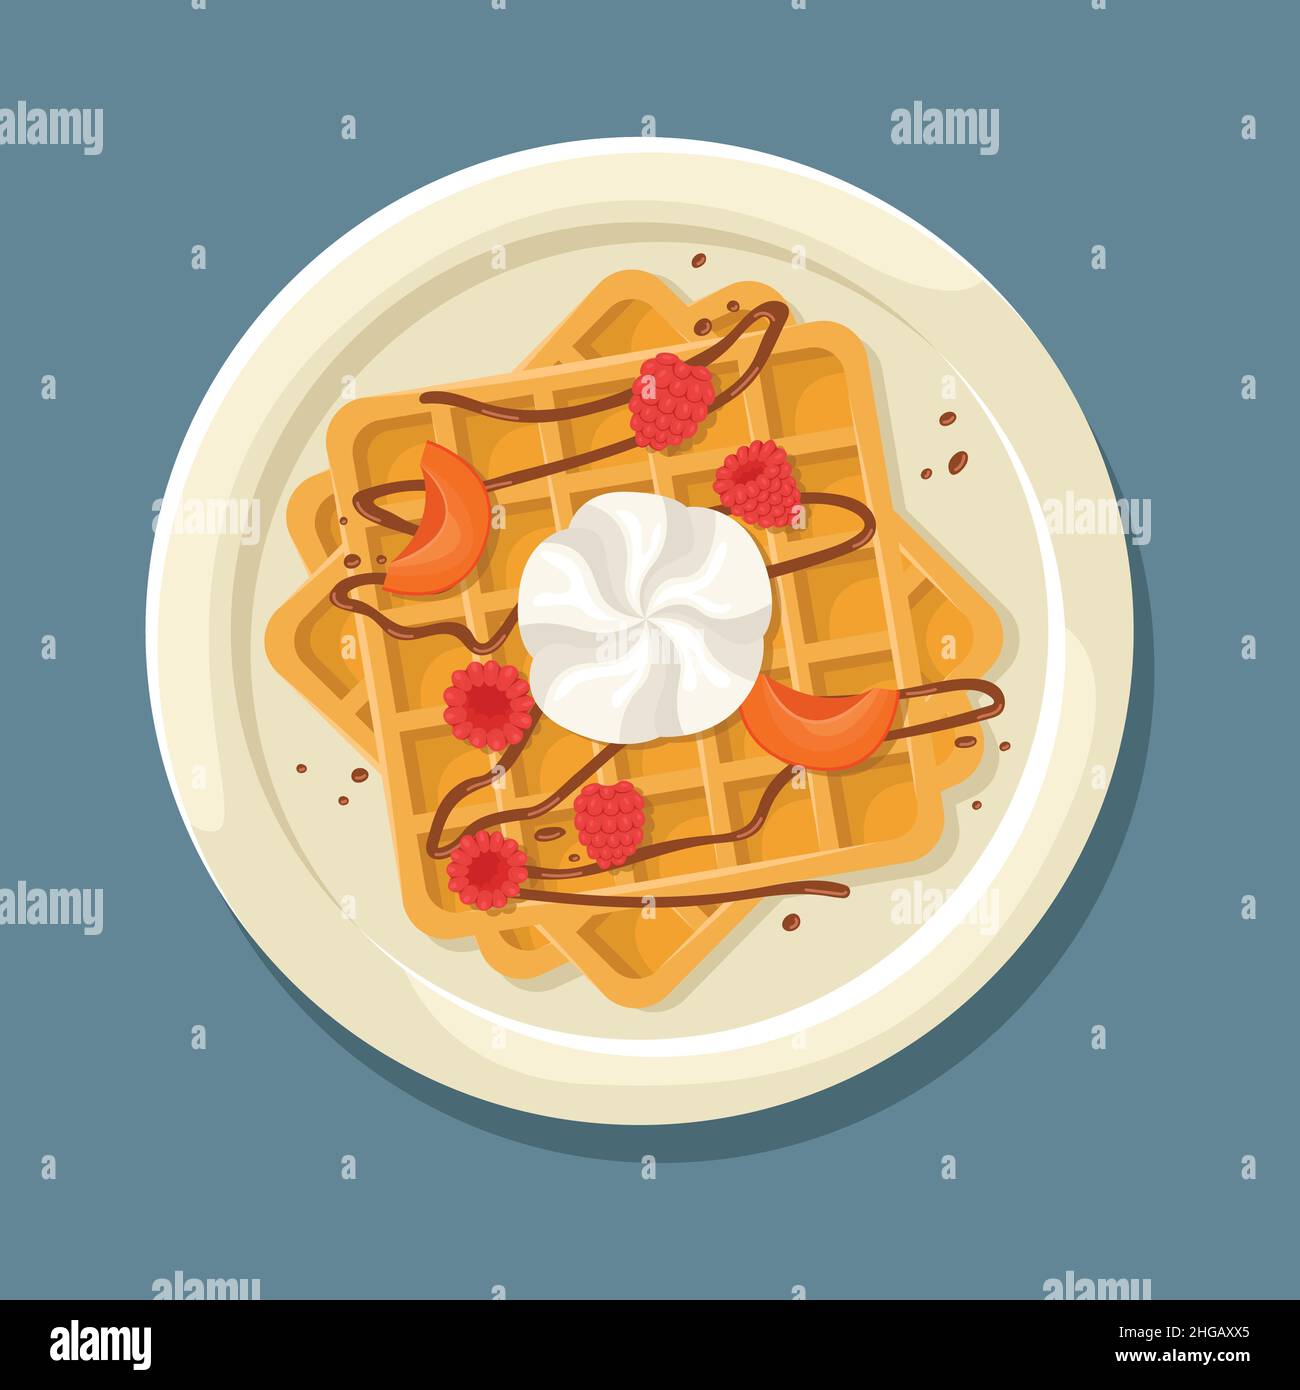 Vector illustration of a Belgian waffle with a ball of ice cream, apricot, raspberry and chocolate sauce. Stock Vector